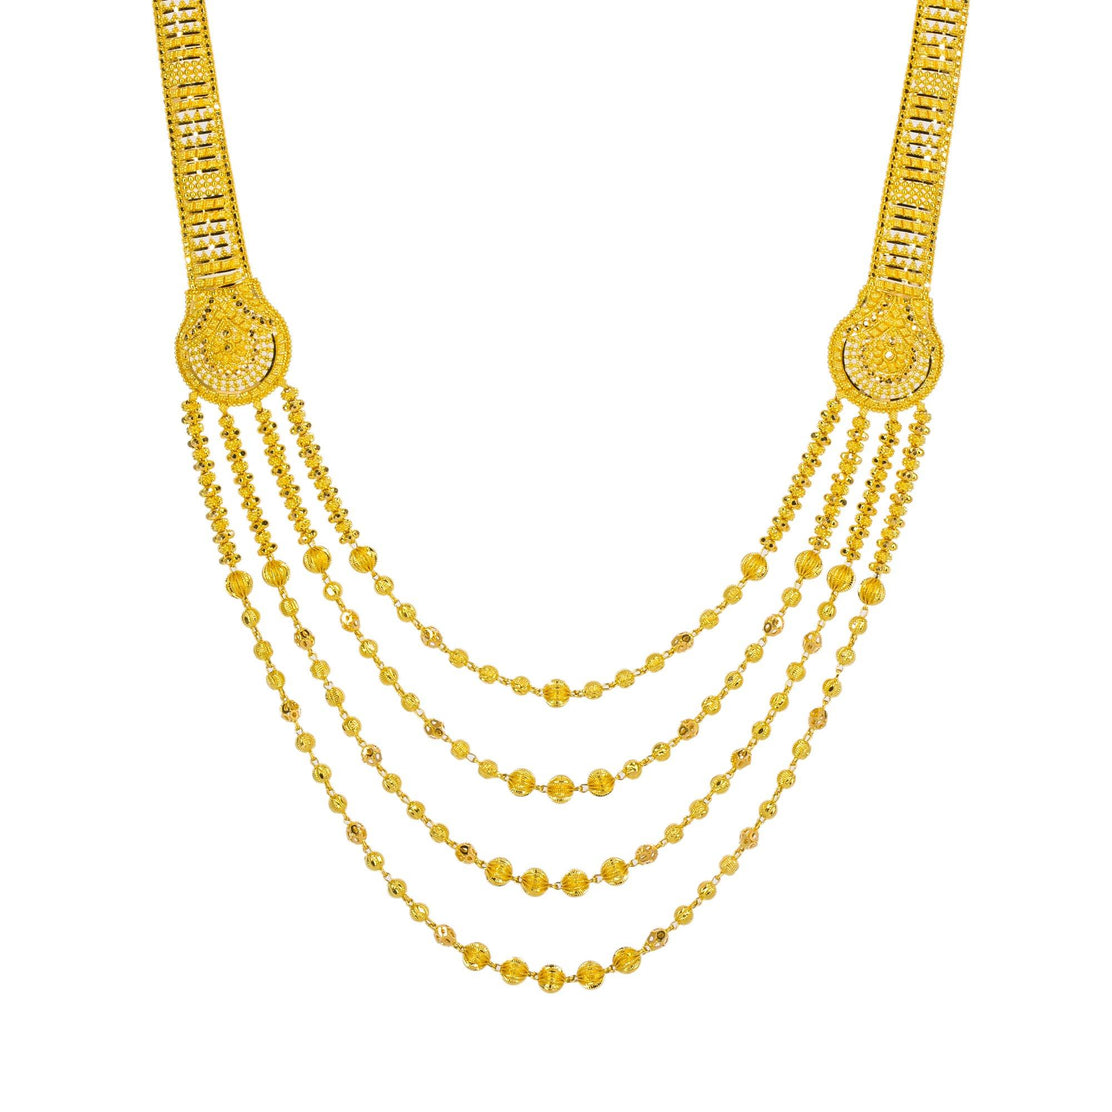 22K Gold Antique Necklace Sets -Indian Gold Jewelry -Buy Online-hanic.com.vn